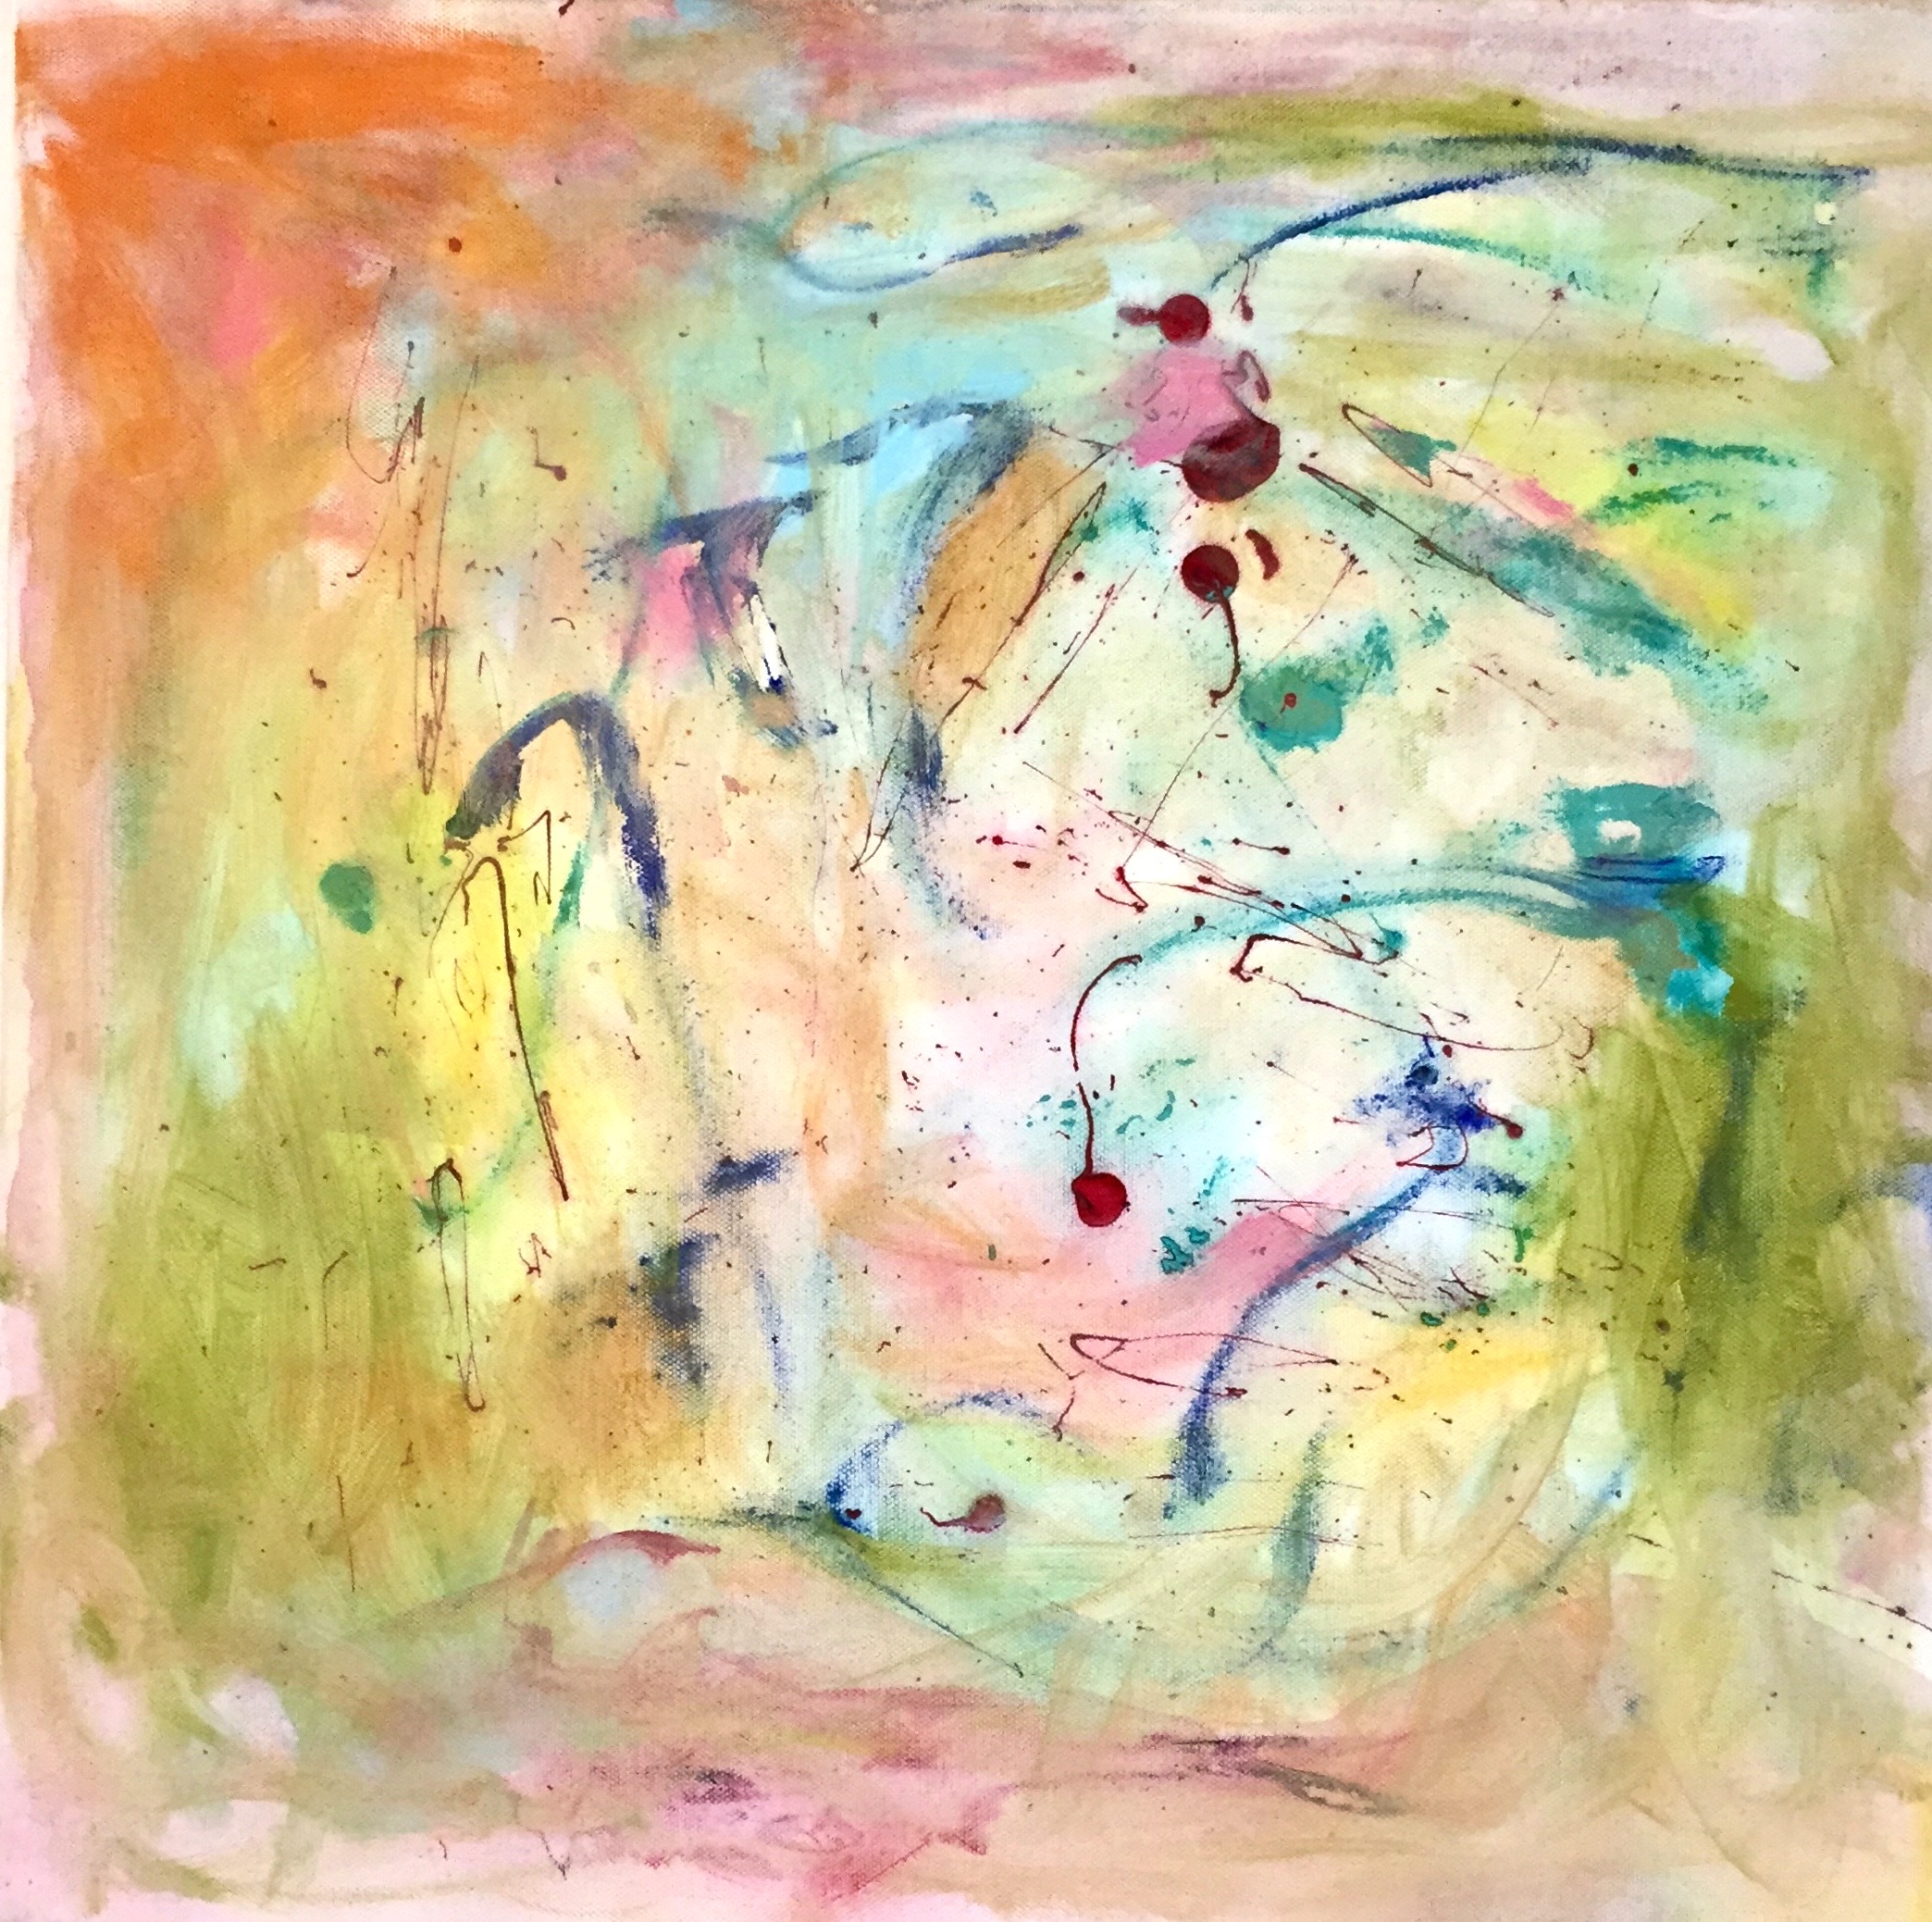 Once Upon the Time, 2019 50 x 50 cm